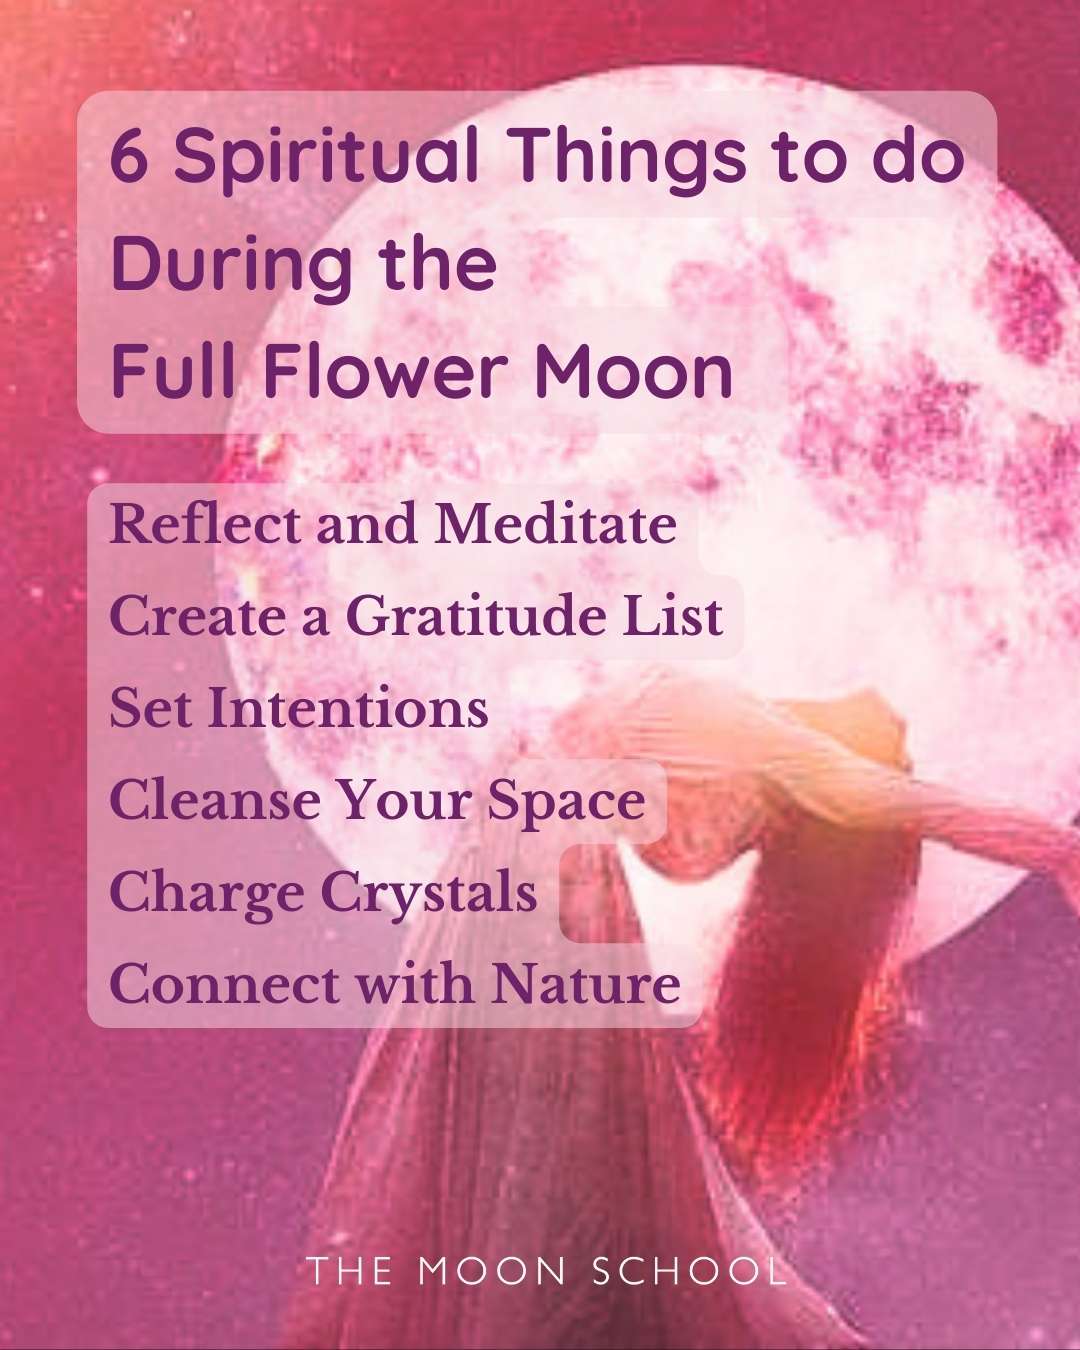 List of flower Moon ideas and activities